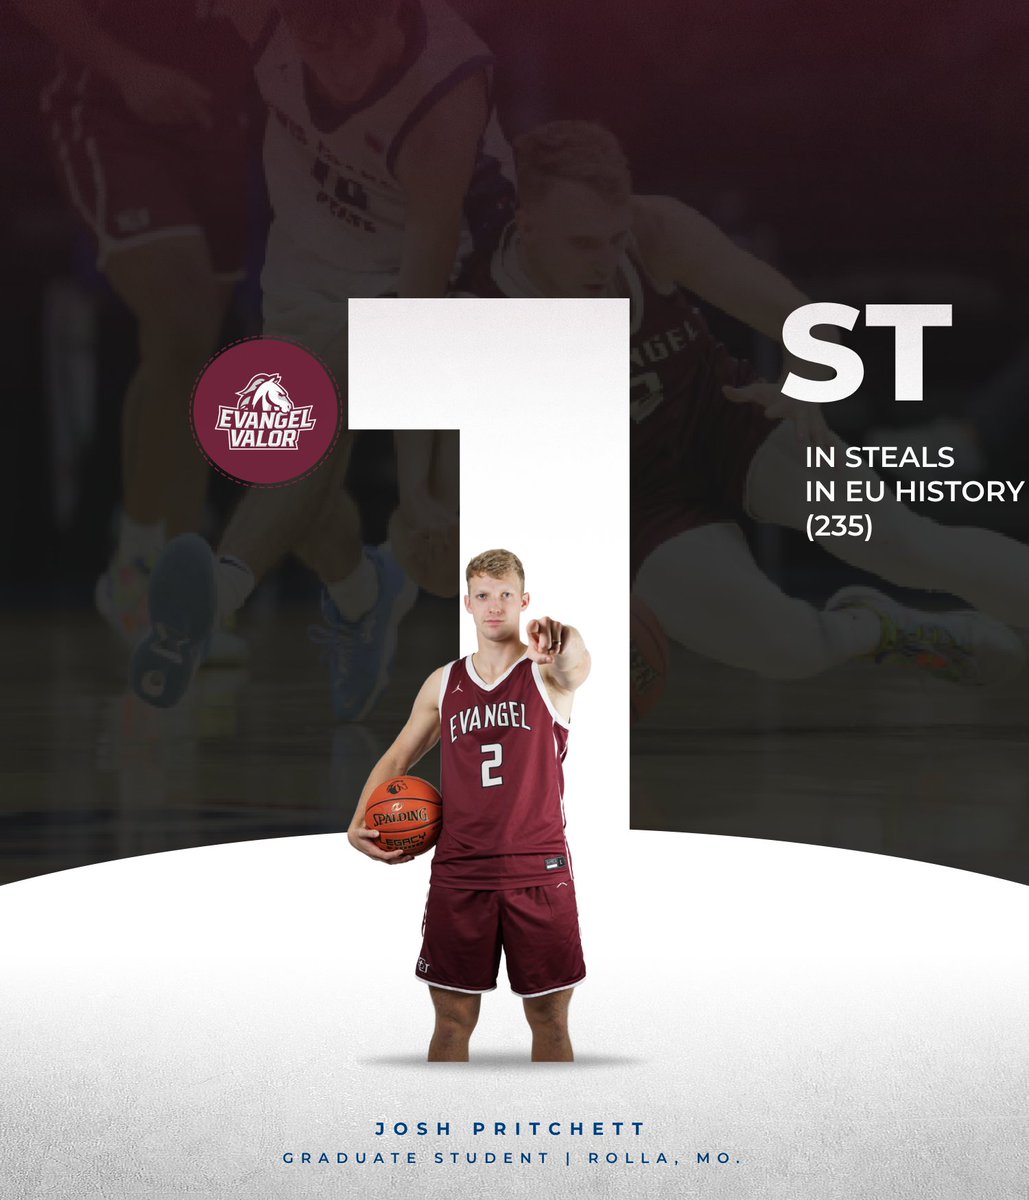 Congratulations to Josh Pritchett, who broke the Evangel school record for steals in a career last night, previously held by Autry Acord, with 235!